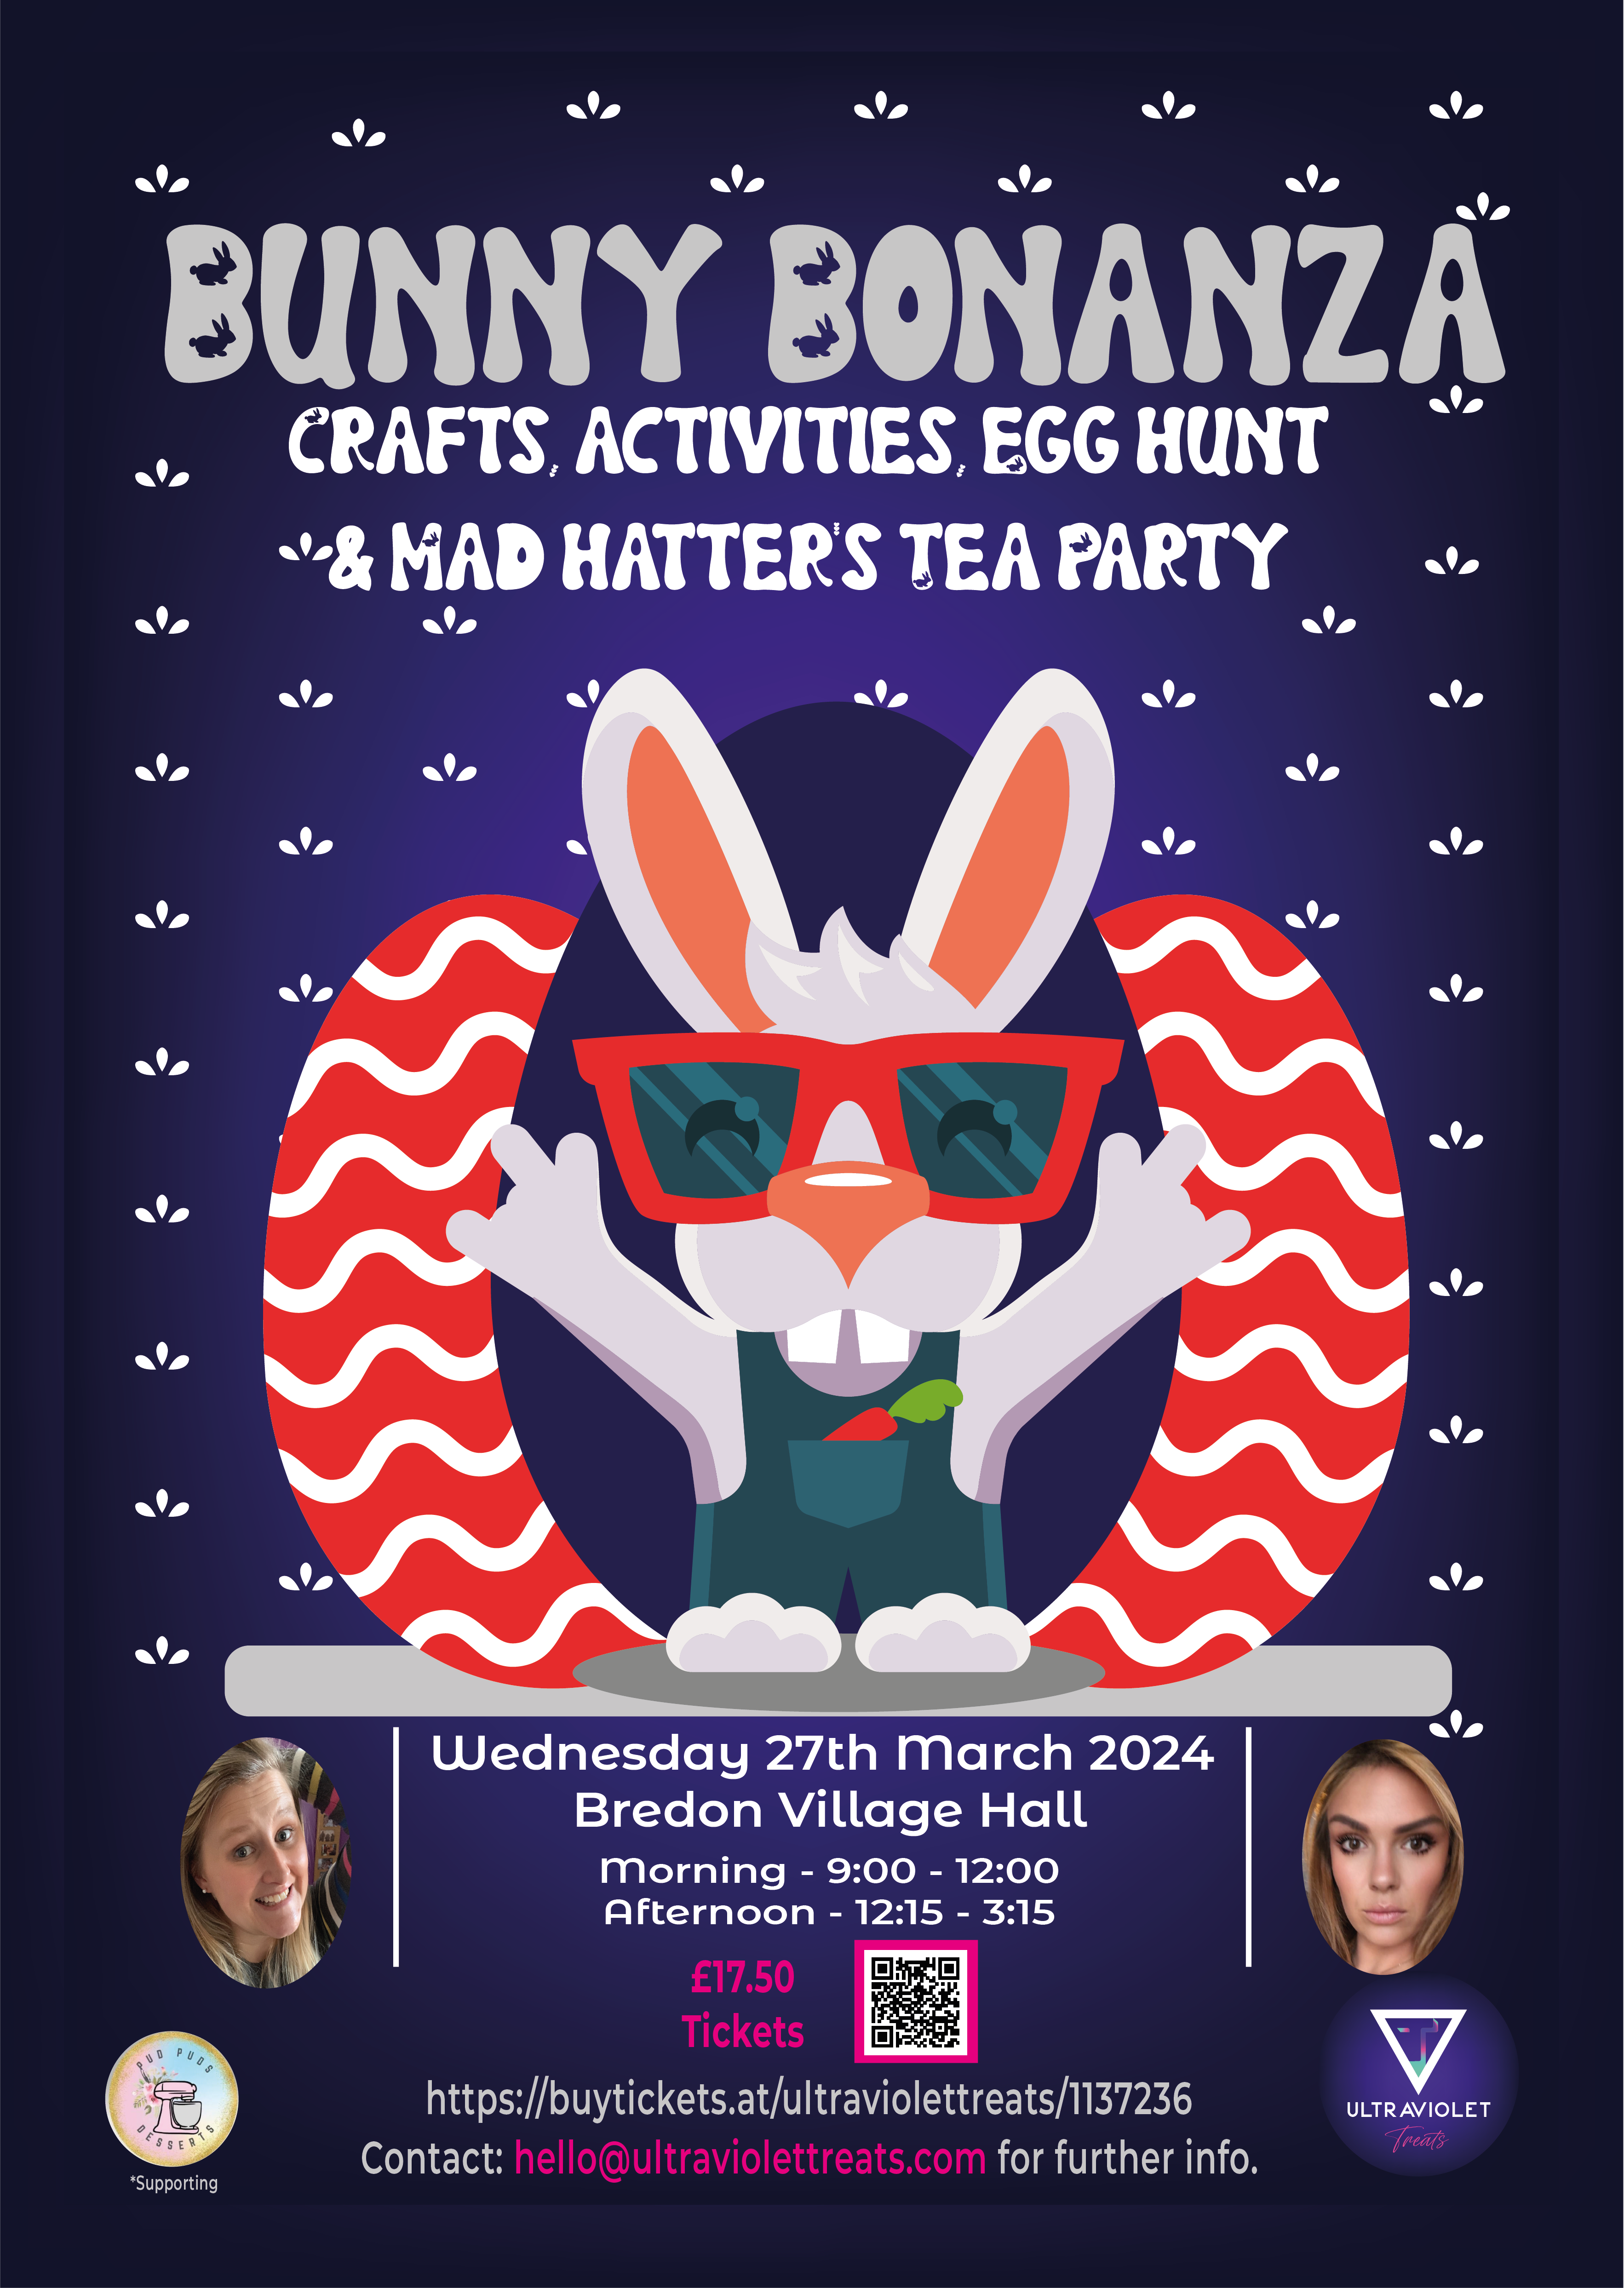 Link to Ticket Tailor to buy tickets to our child friendly Easter event